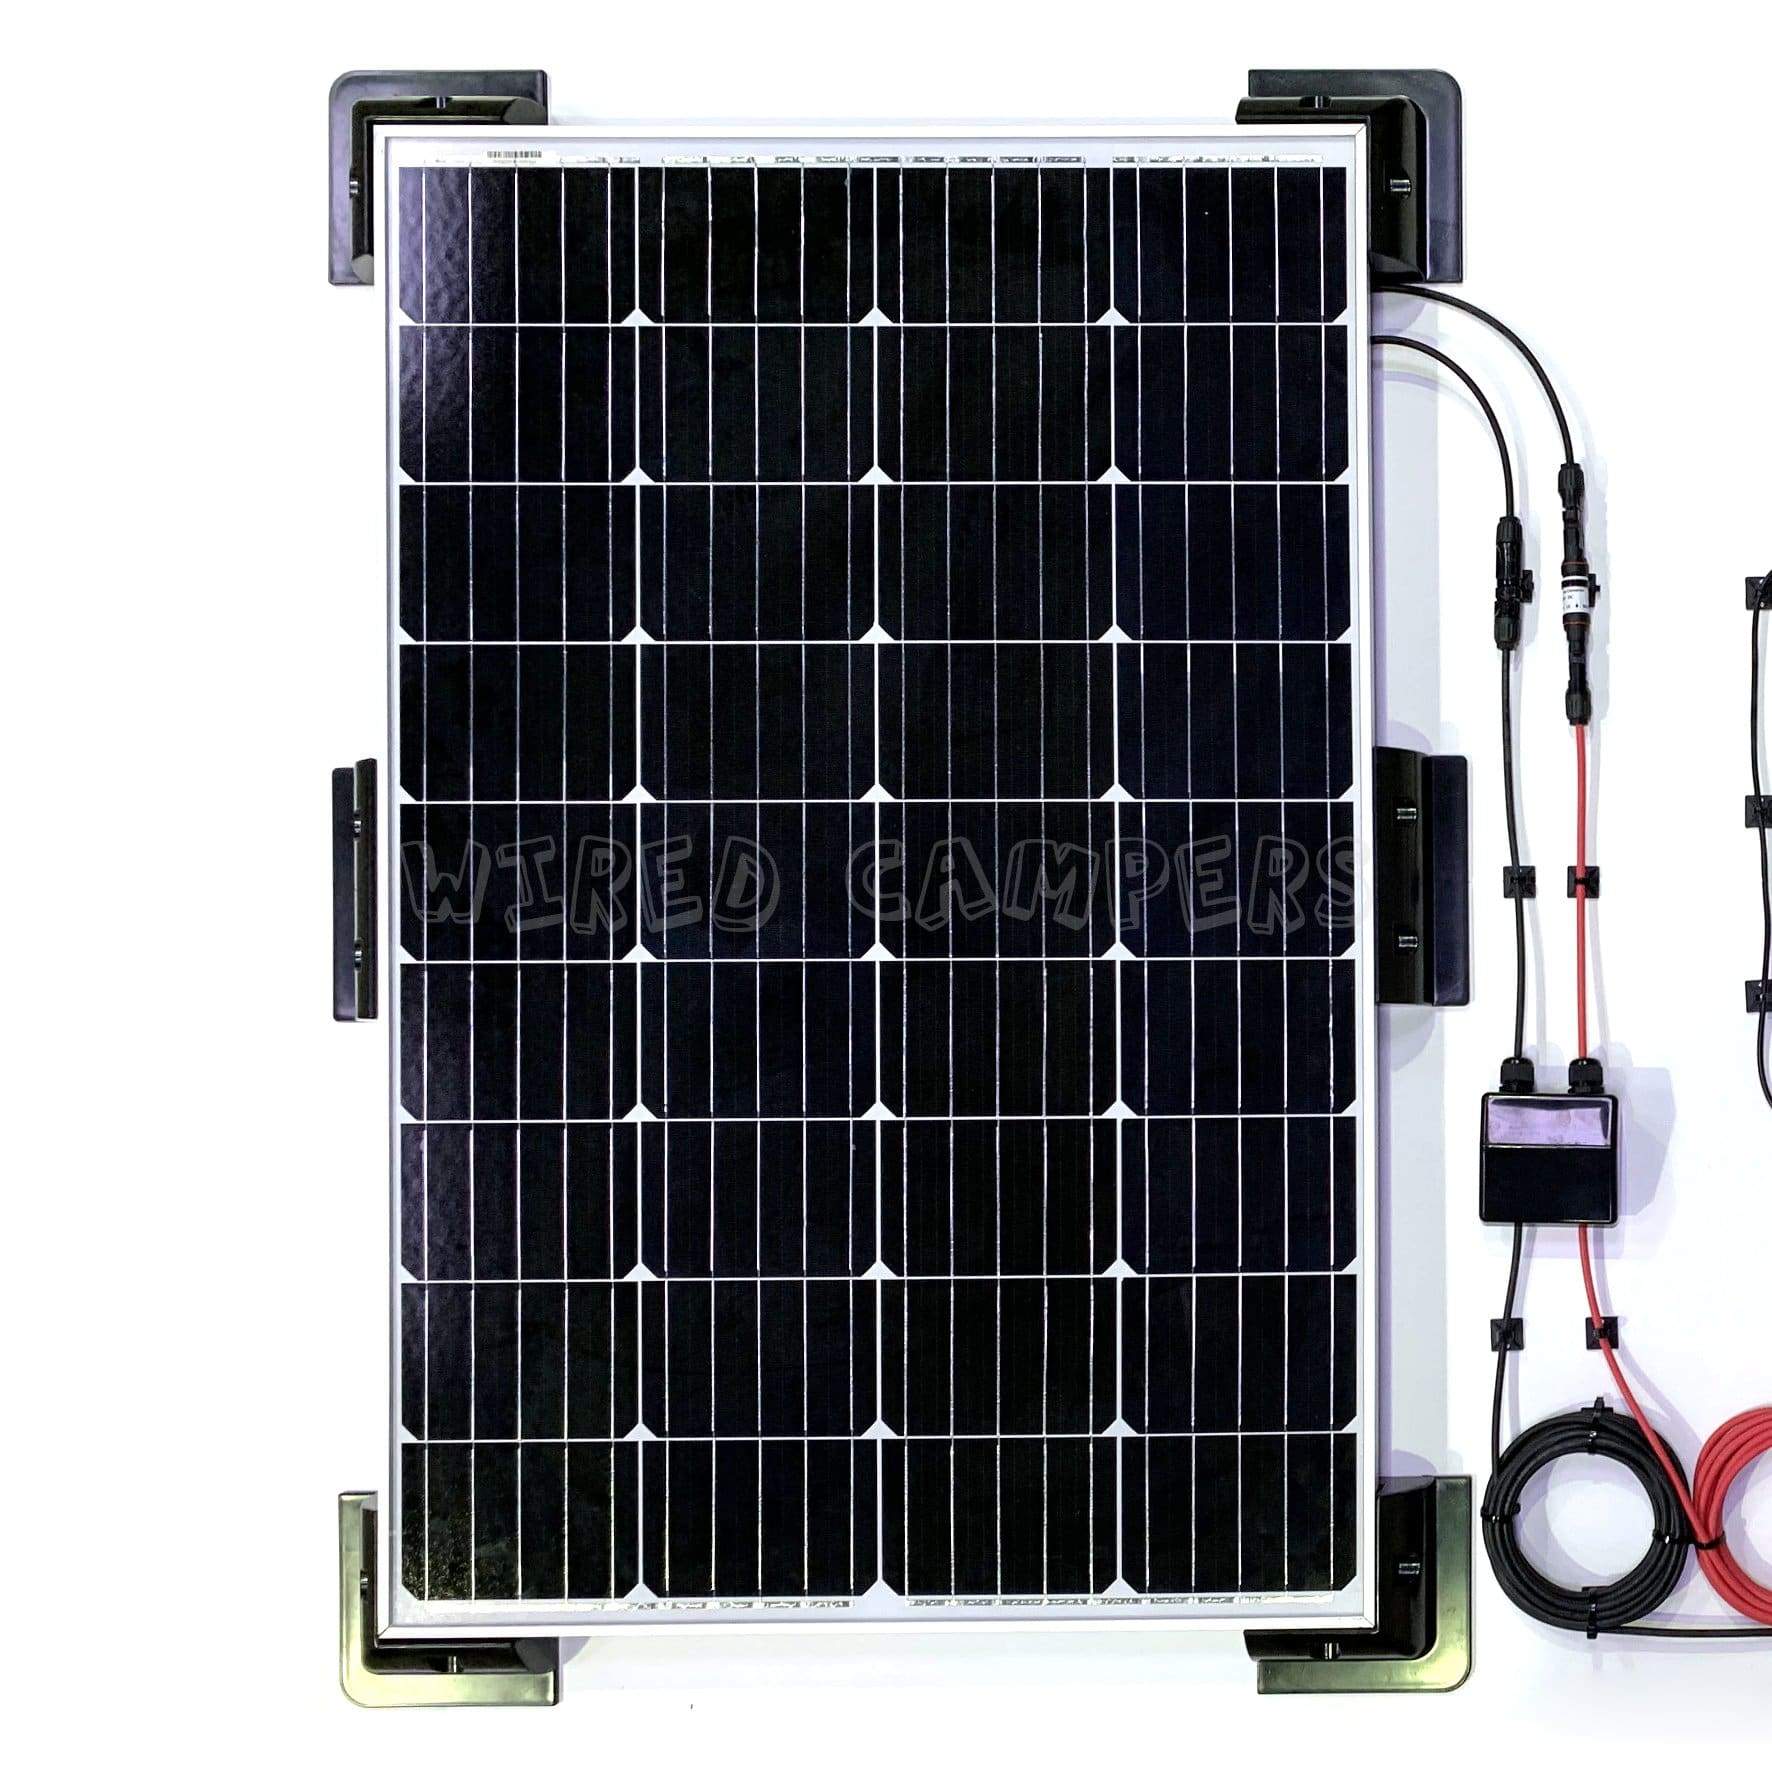 Wired Campers Solar Complete 130W Solar Panel MPPT Camper Van Kit With Control Panel